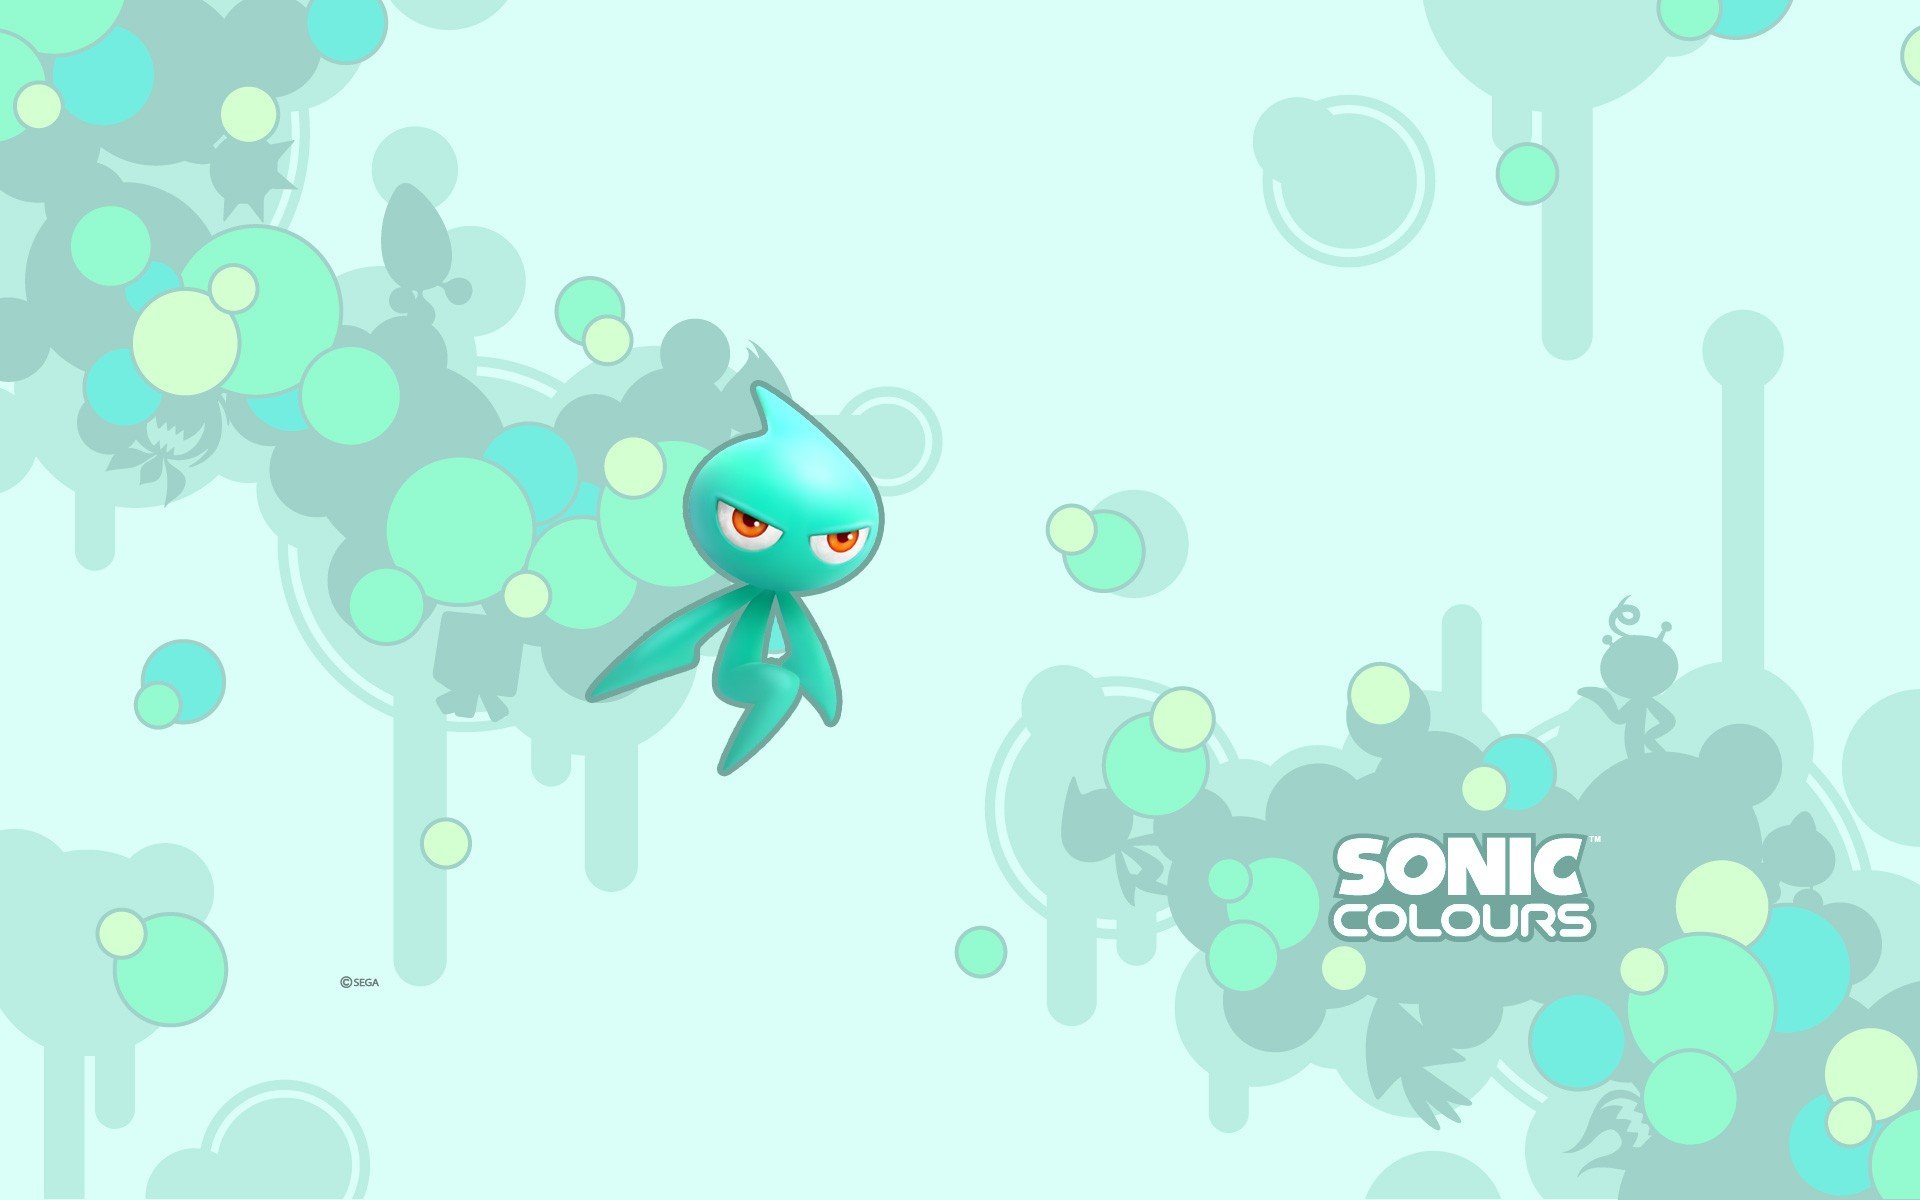 Sonic the Hedgehog, Sonic Colors Wallpaper